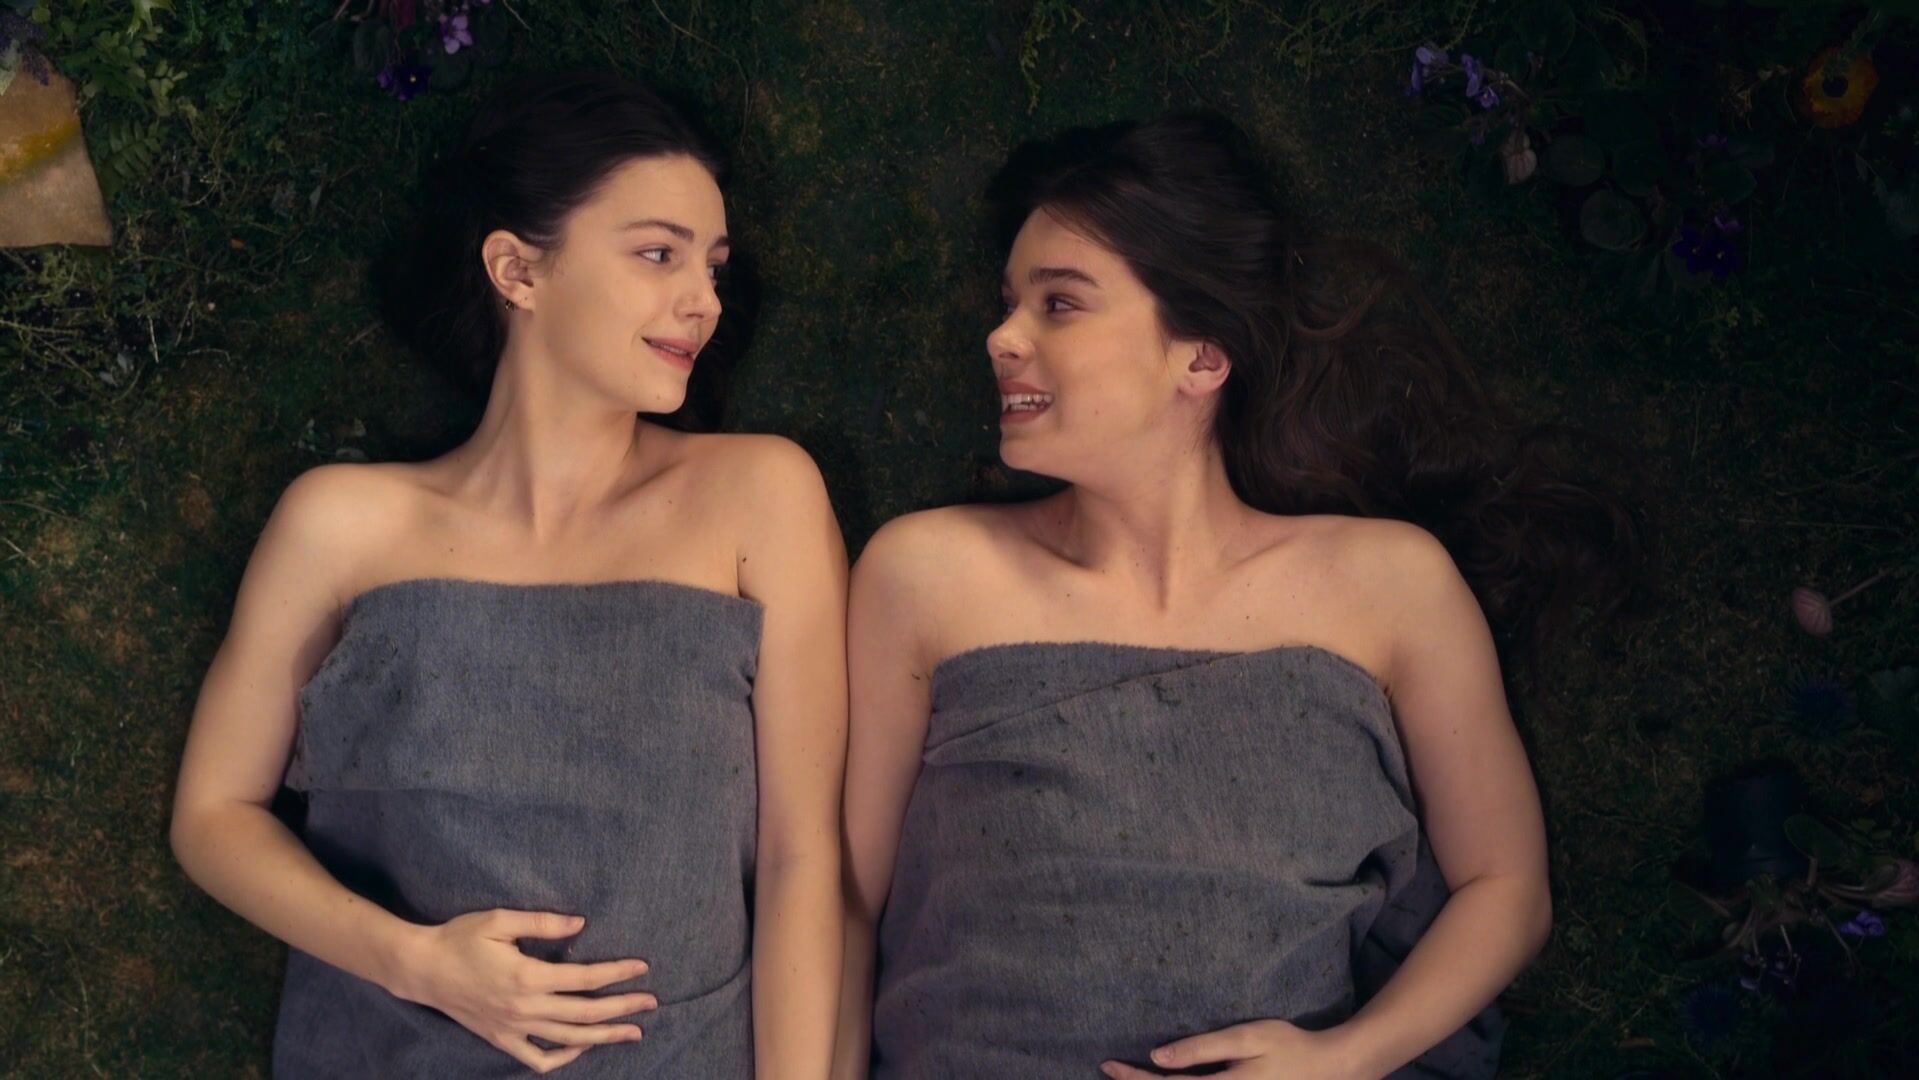 Chick Hailee Steinfeld's sexy lesbian scenes from Dickinson s02e10 (2021) Grosso